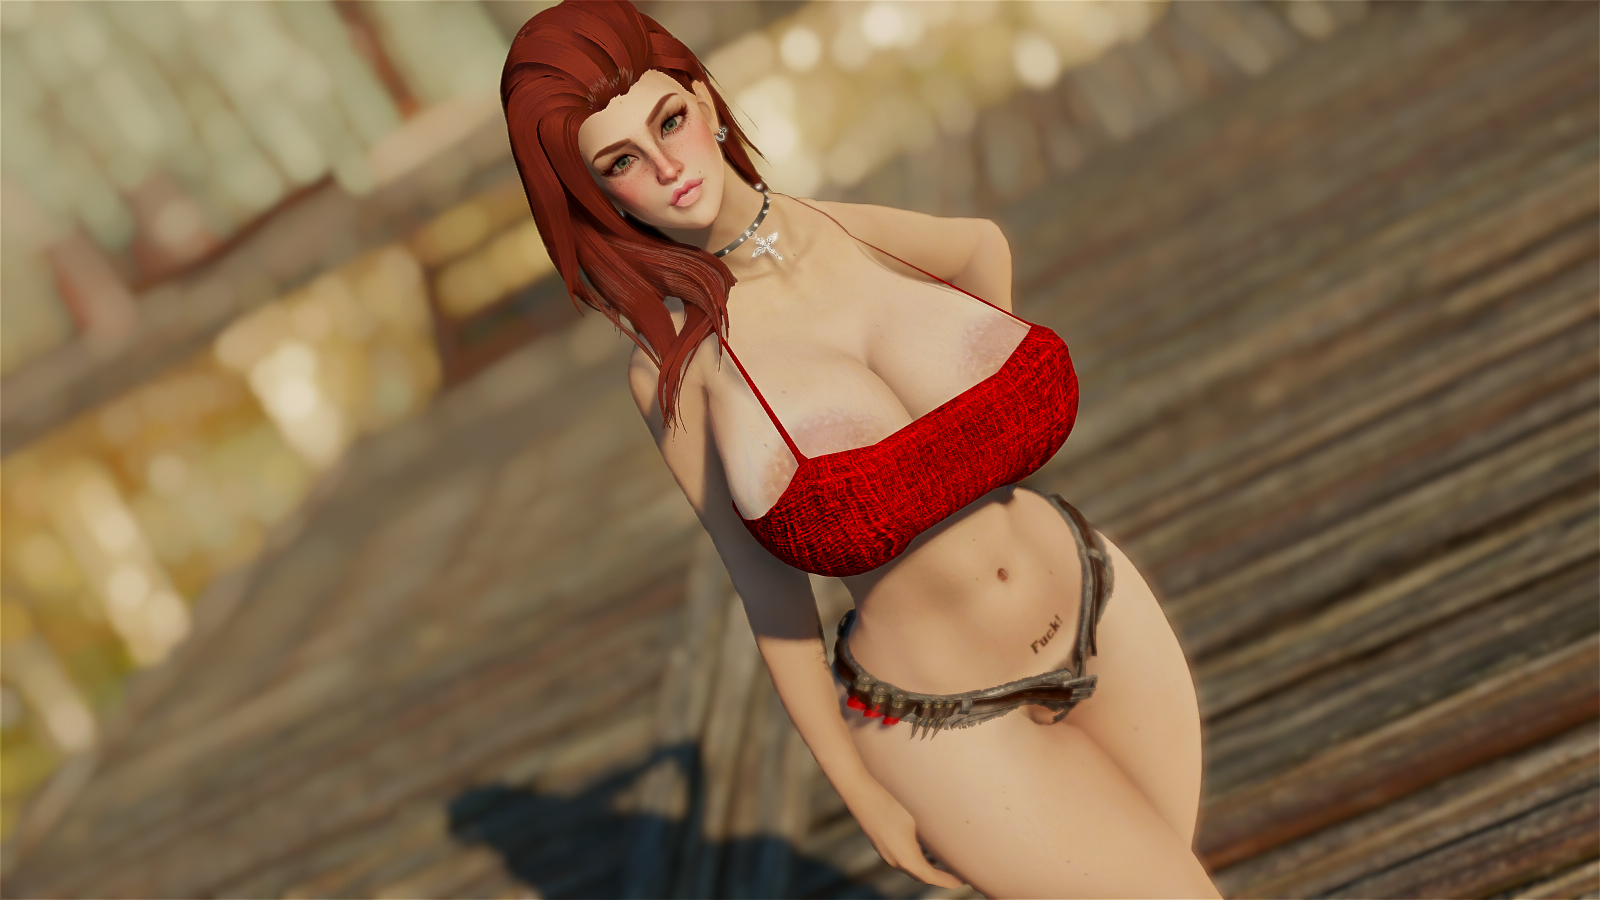 post your sexy screens here! - Page 231 - Fallout 4 Adult ...